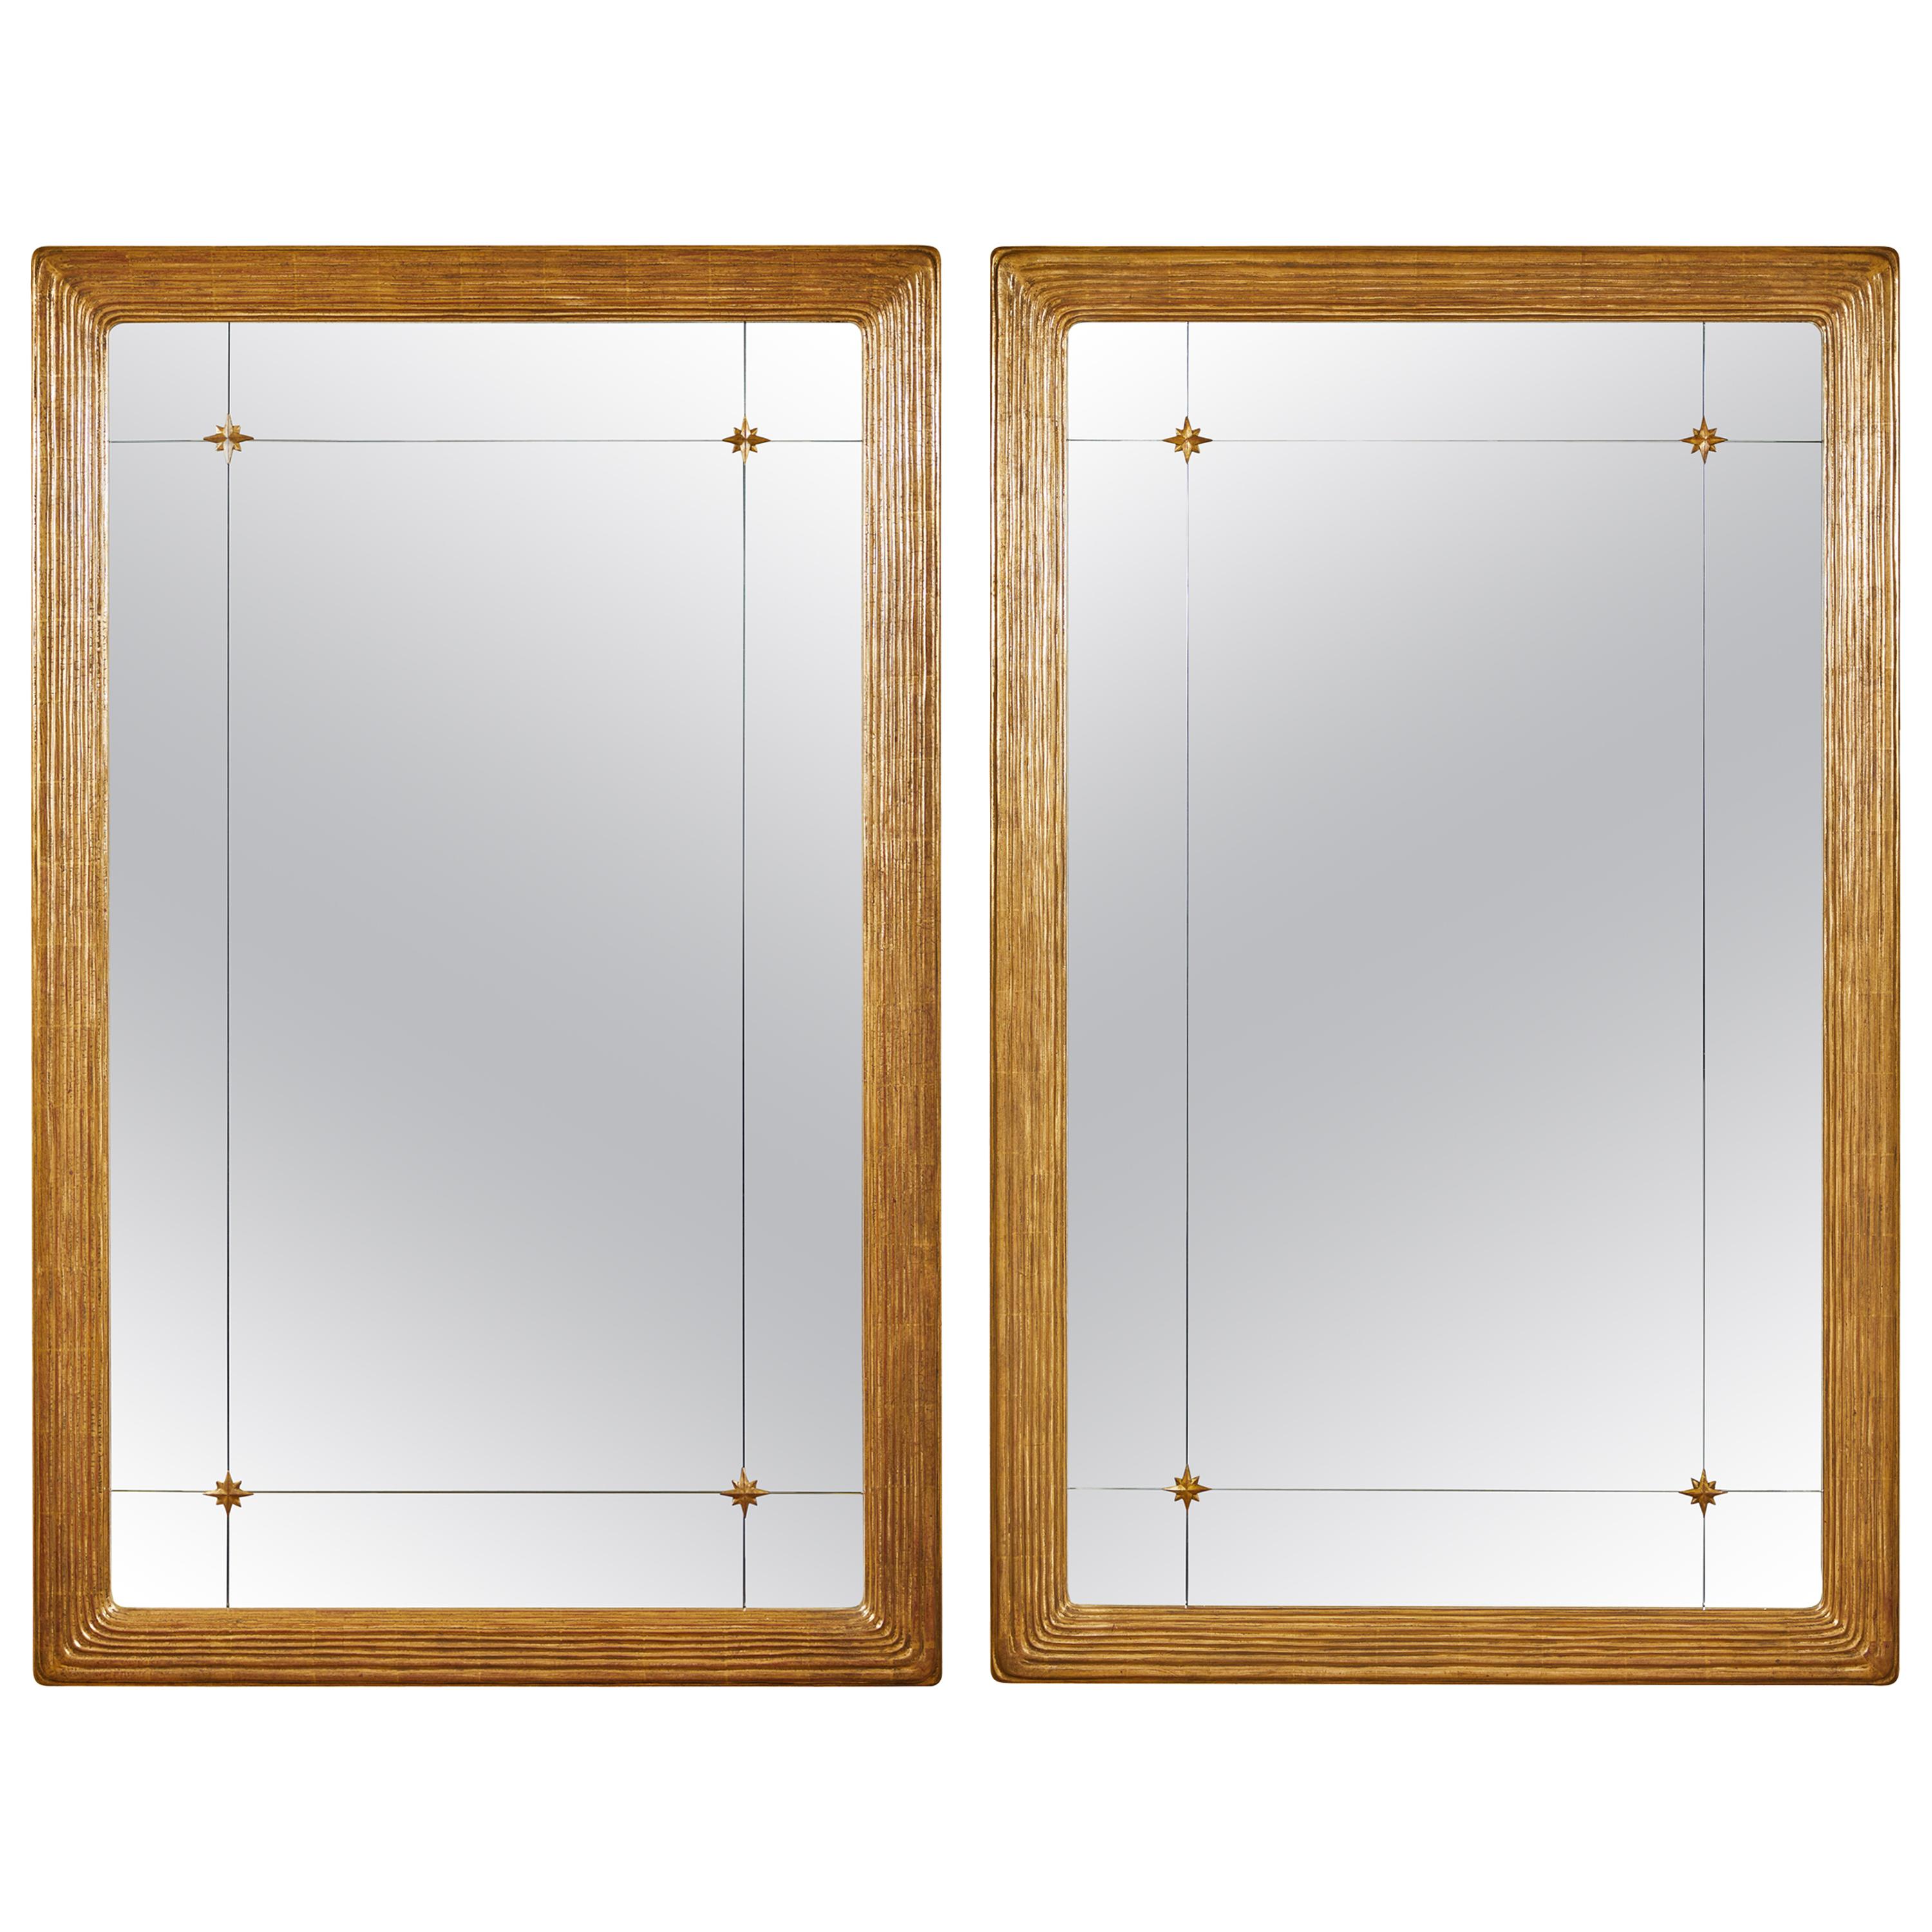 Pair of Hand-Carved Gilded Mirrors "Park Avenue" For Sale